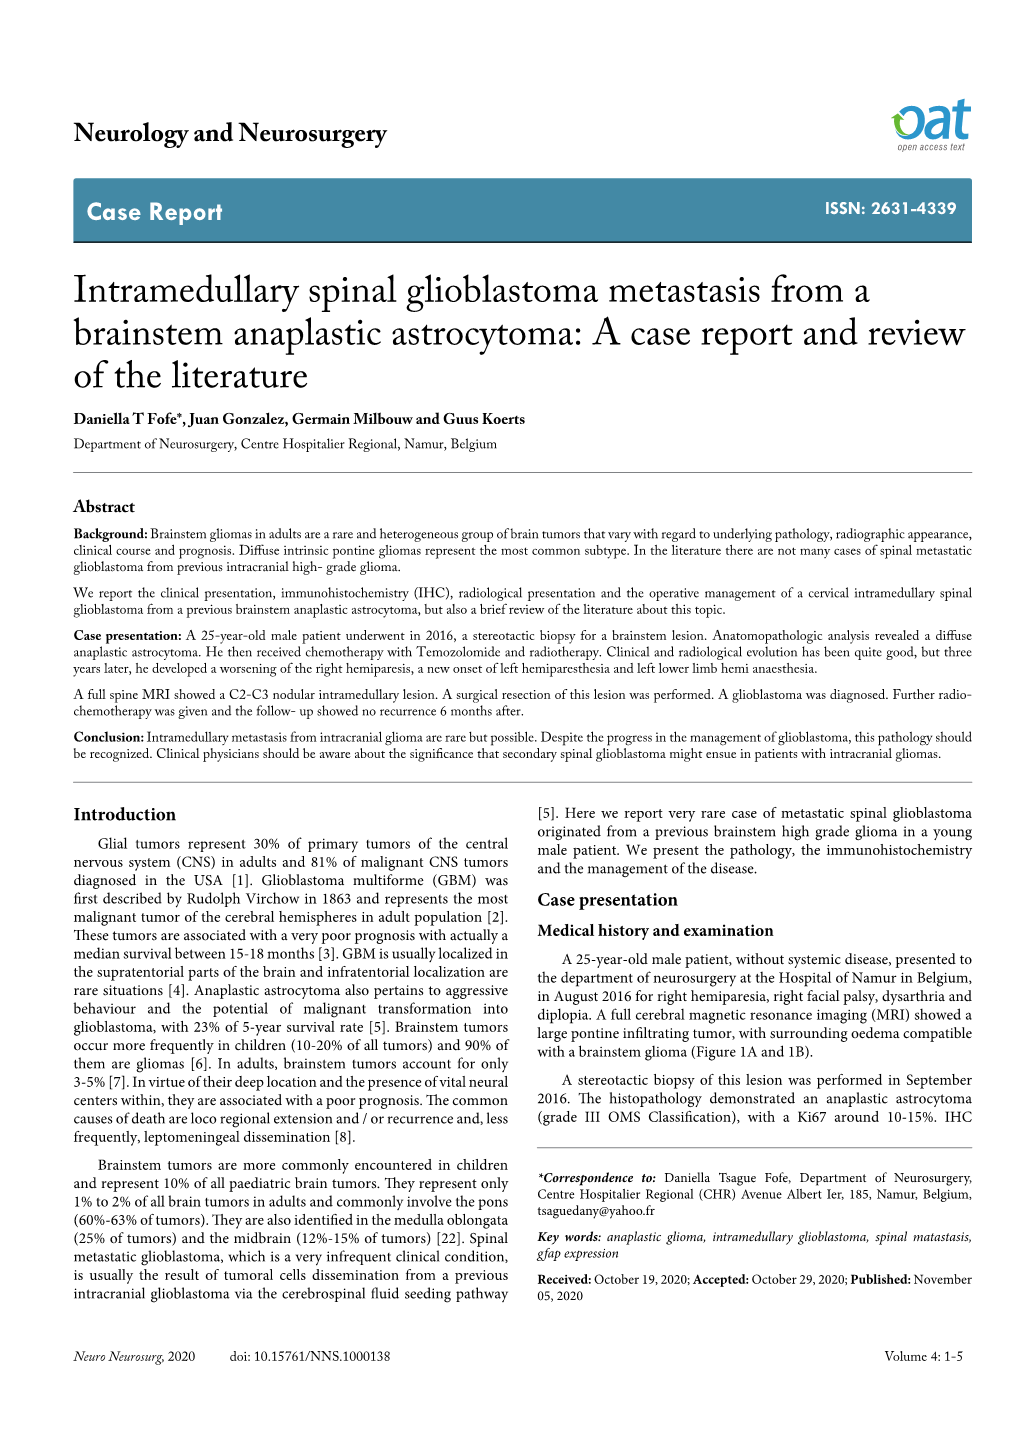 Intramedullary Spinal Glioblastoma Metastasis from a Brainstem Anaplastic Astrocytoma: a Case Report and Review of the Literatur